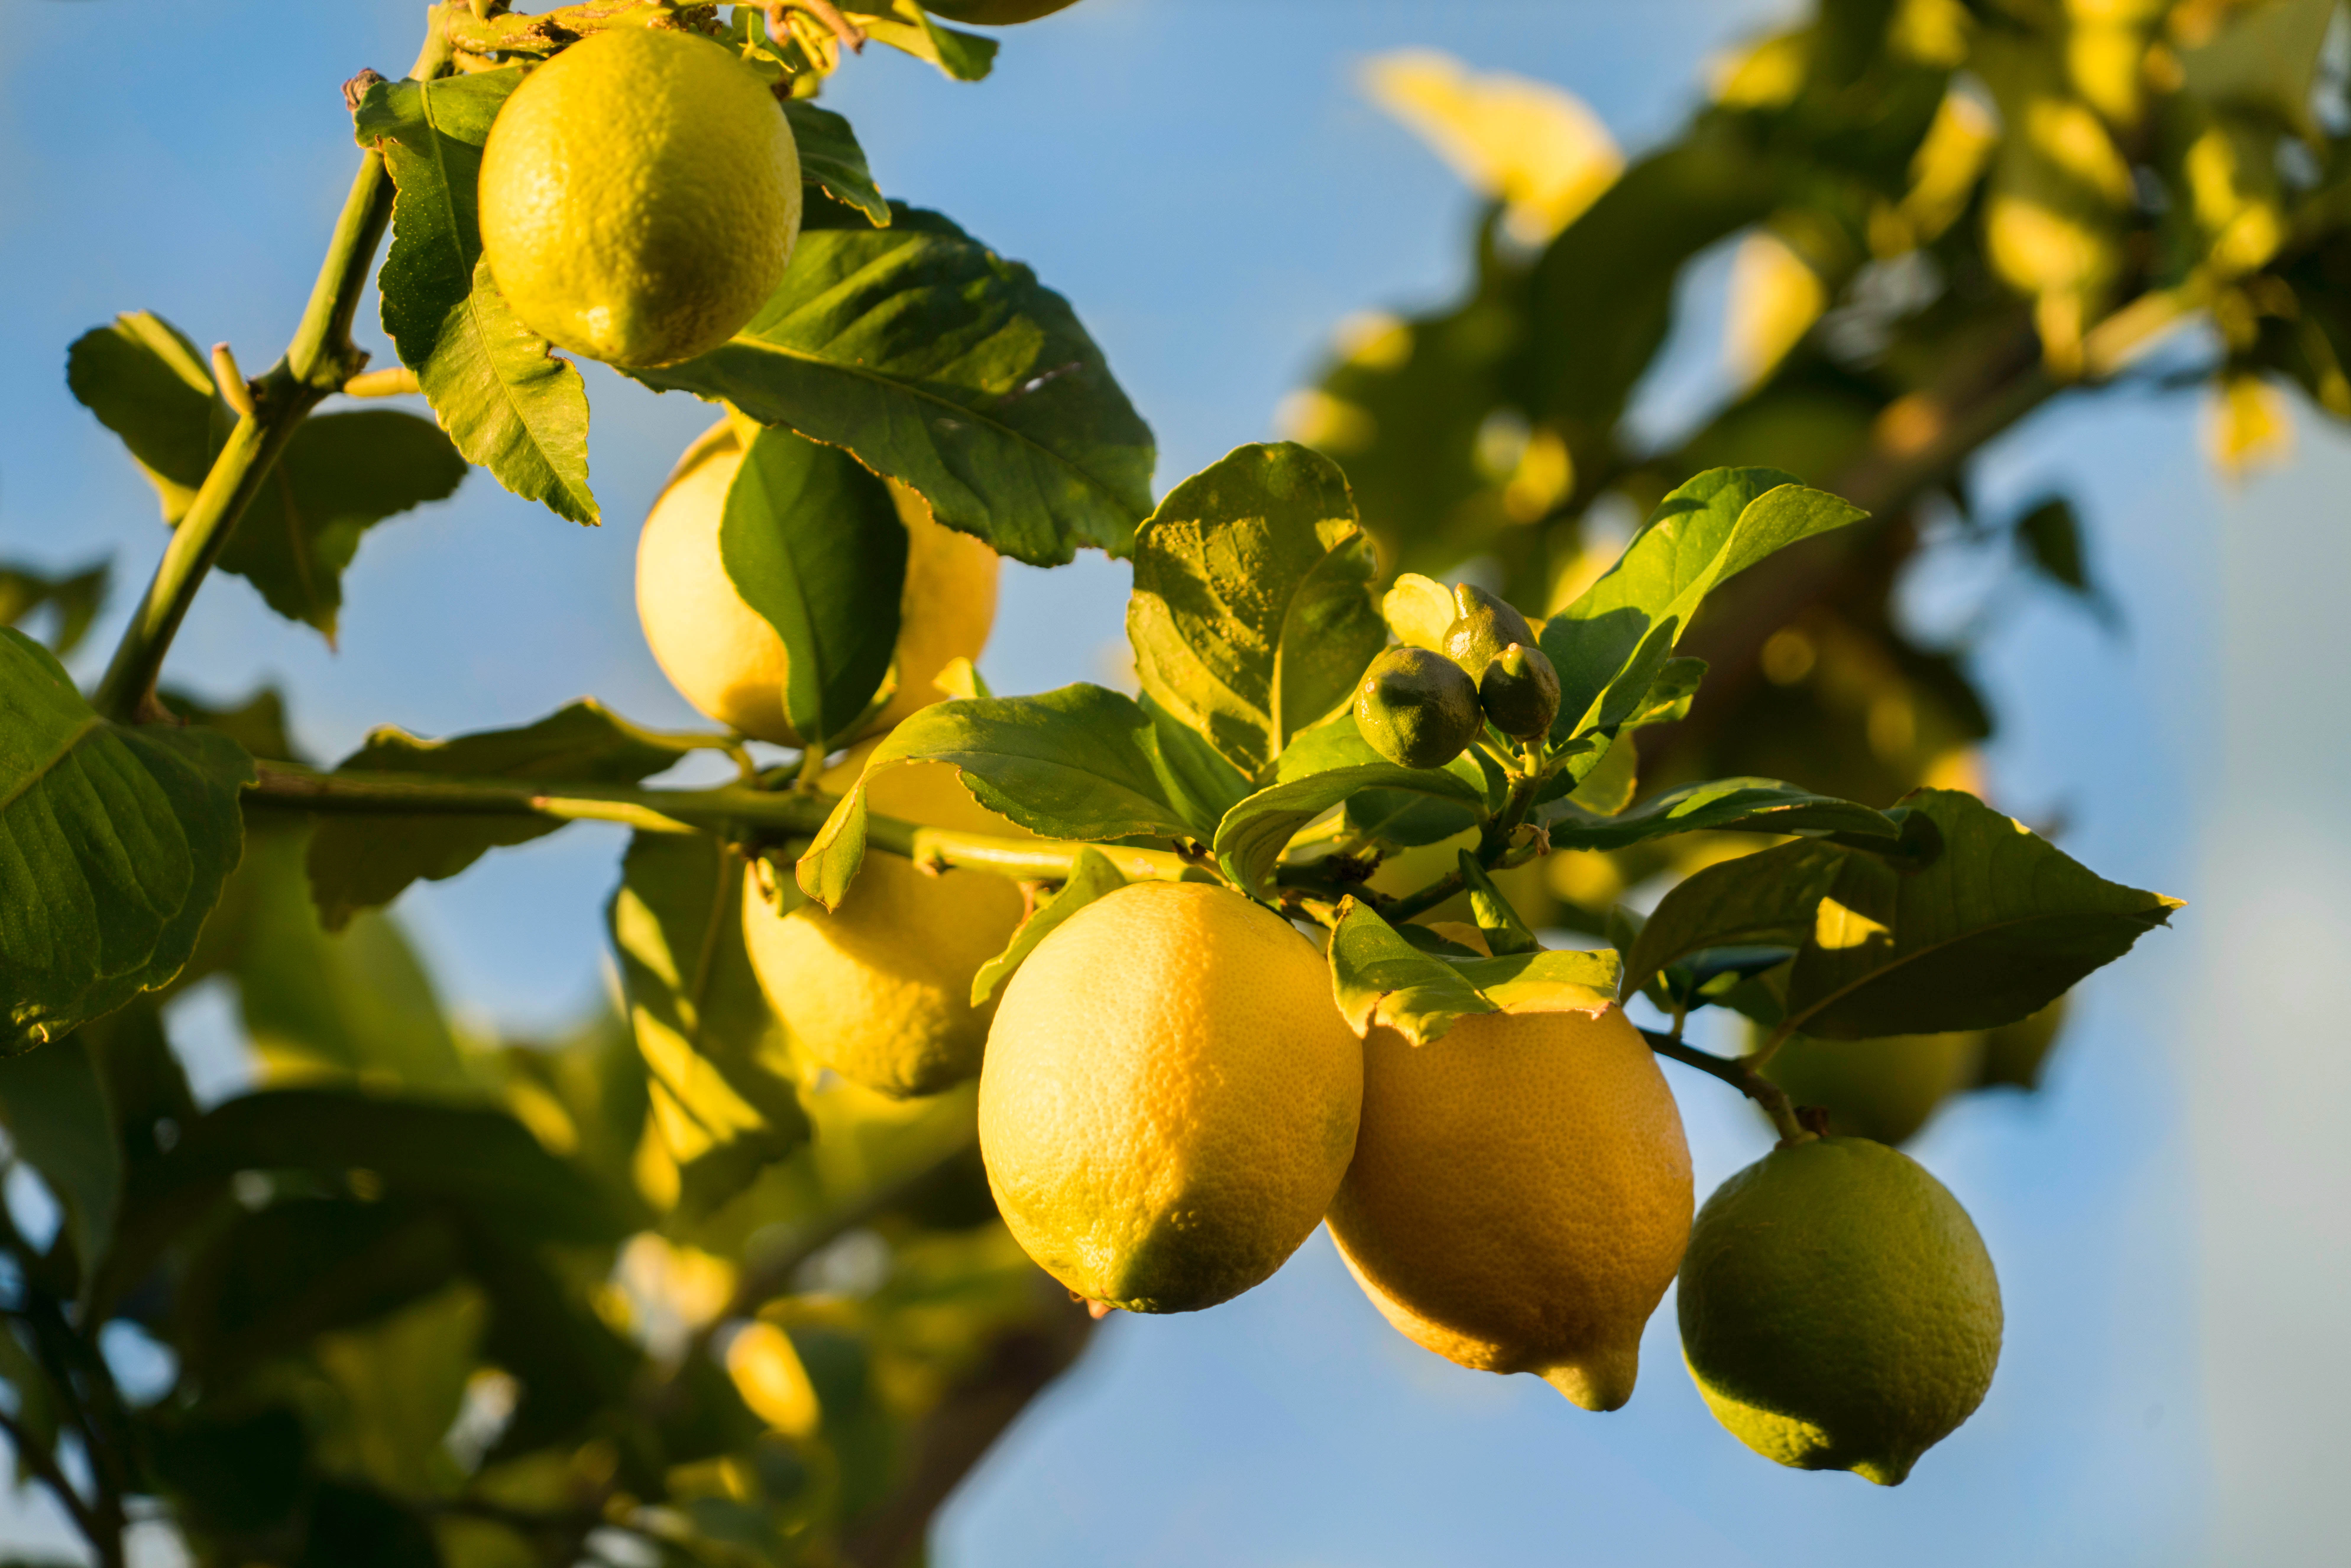 Lemons growing on a tree, blue sky in the background.